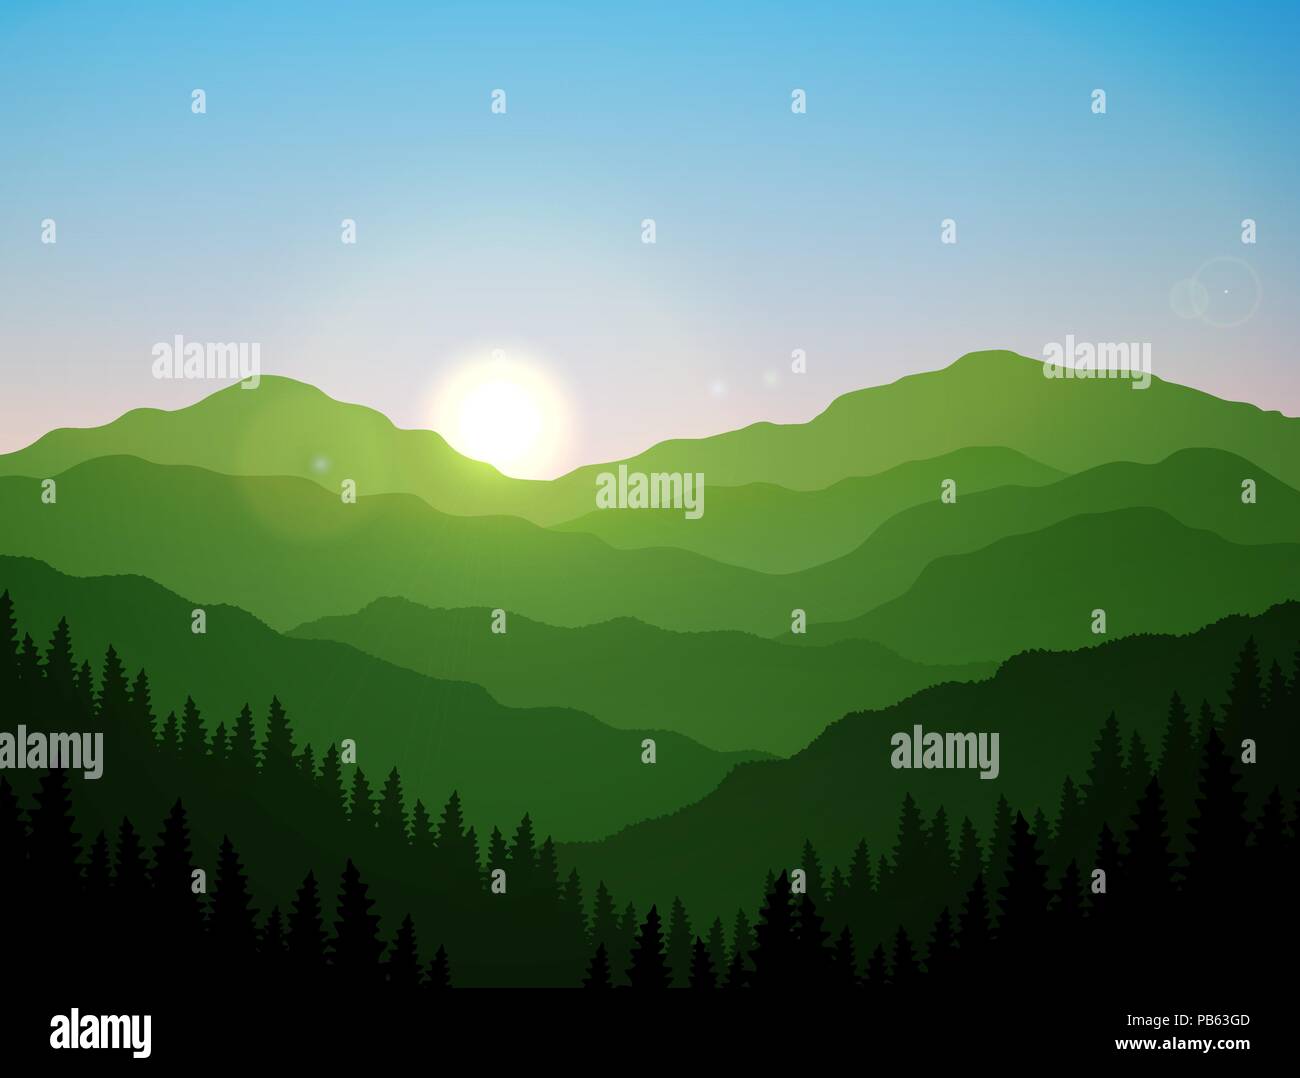 A group of green mountains and hills at beautiful sunrise Stock Vector